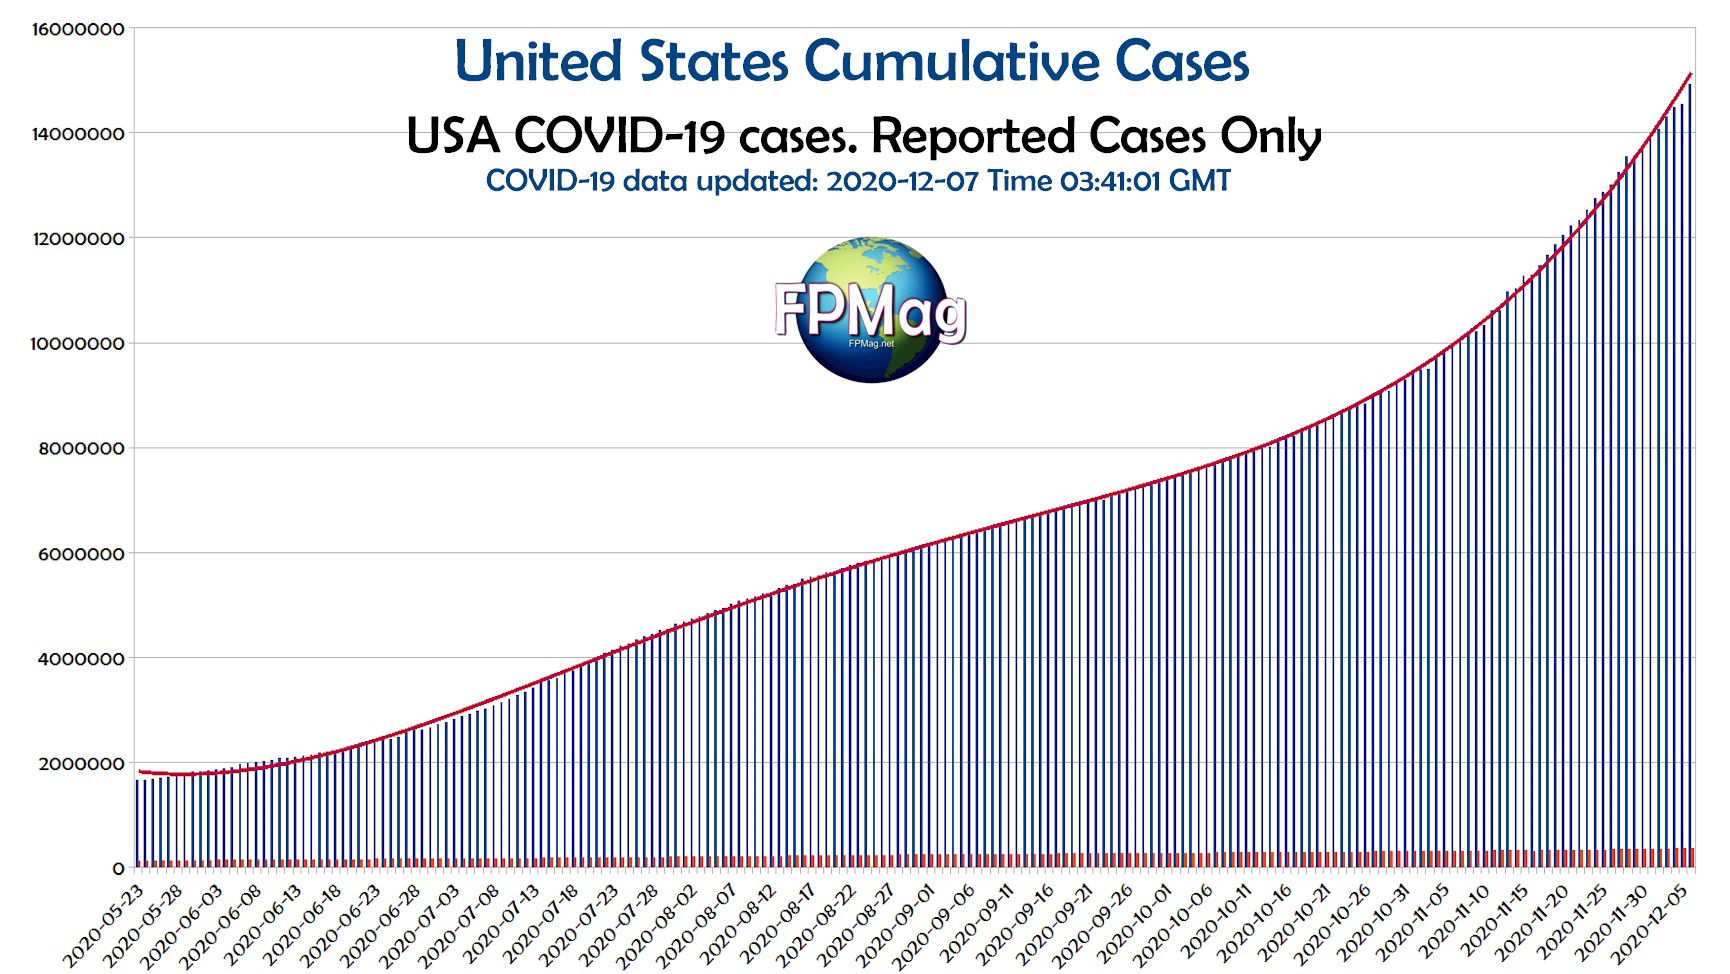 USA hit 15 million cases yesterday including military and its territories. 